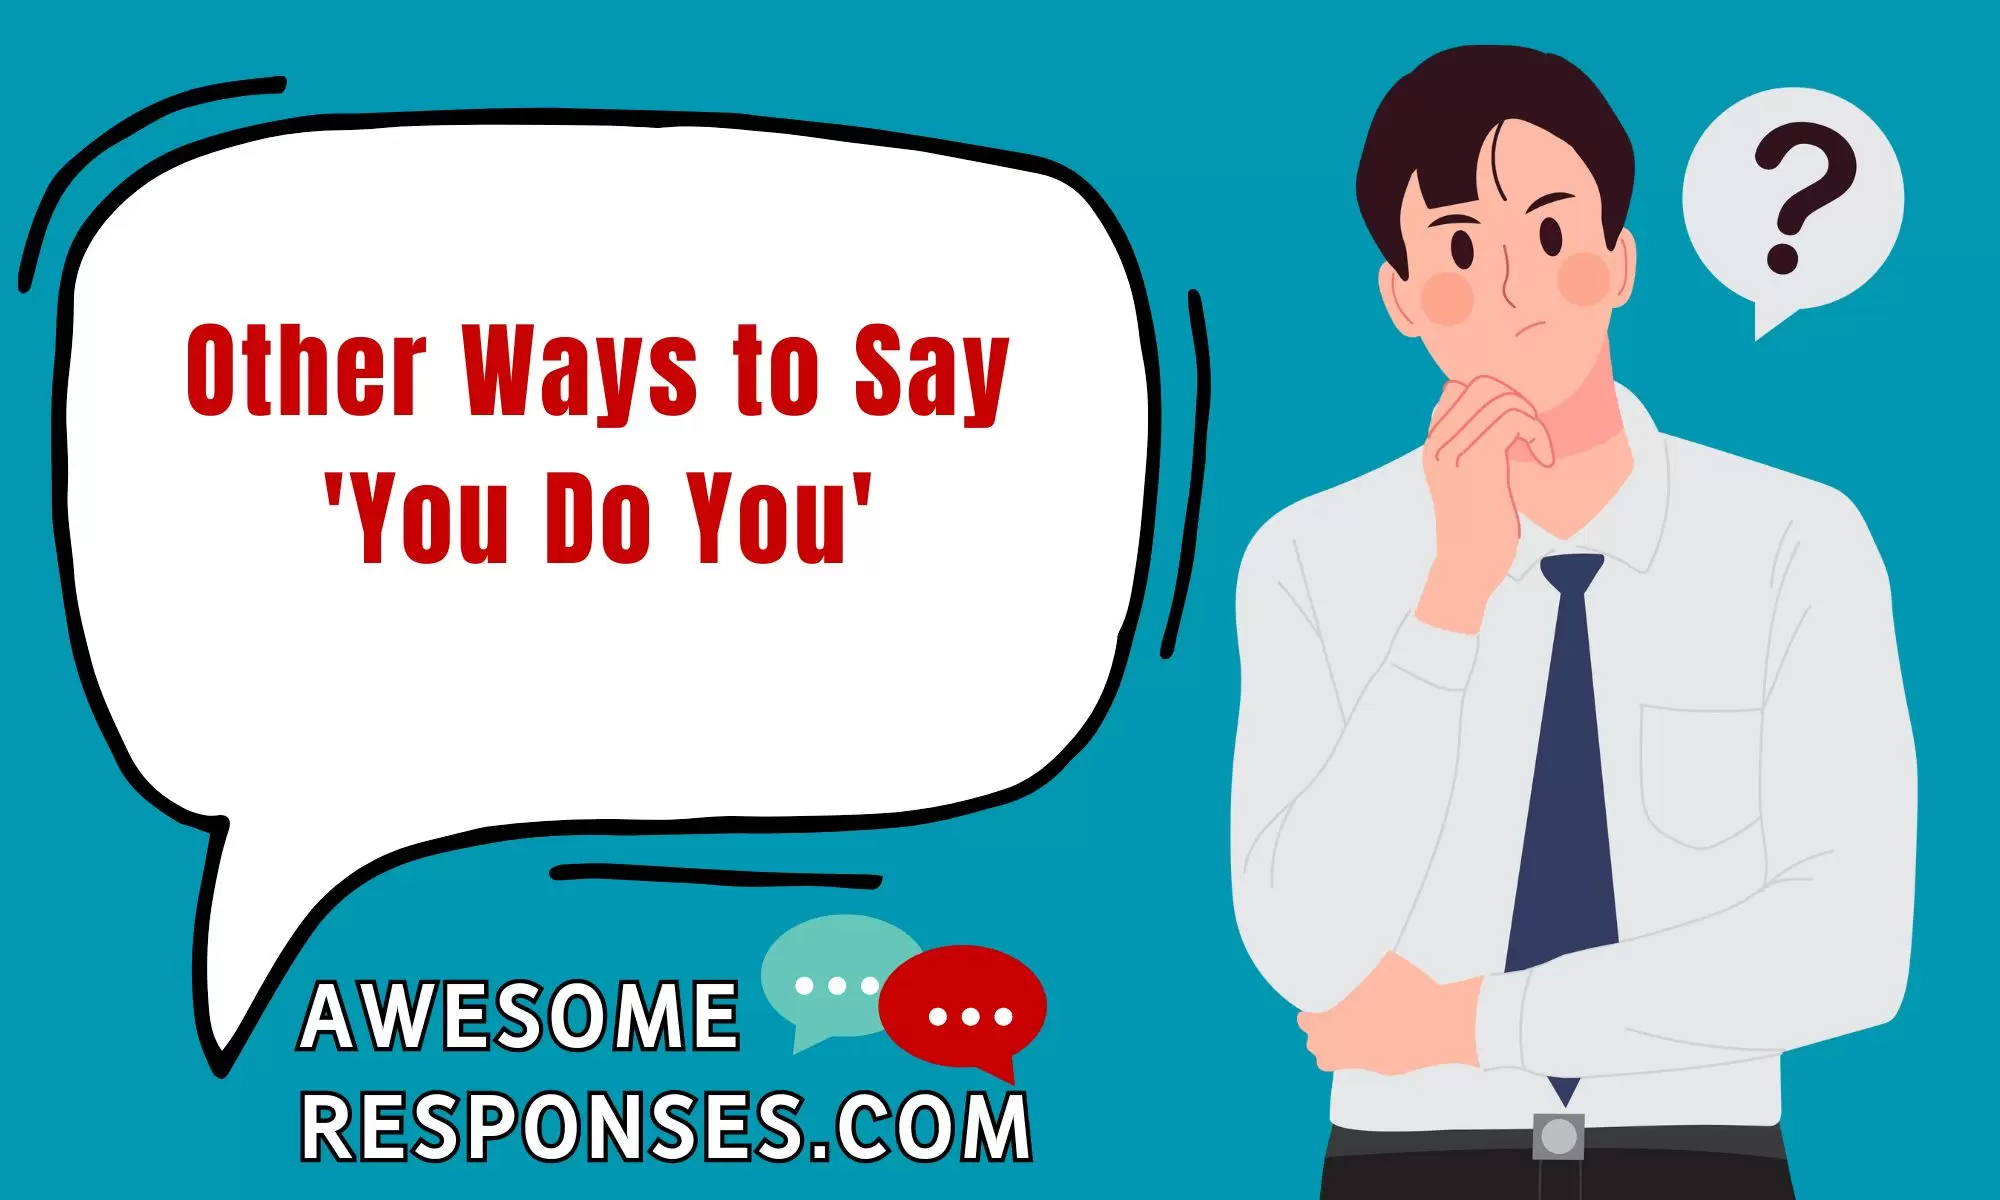 Other Ways to Say 'You Do You'